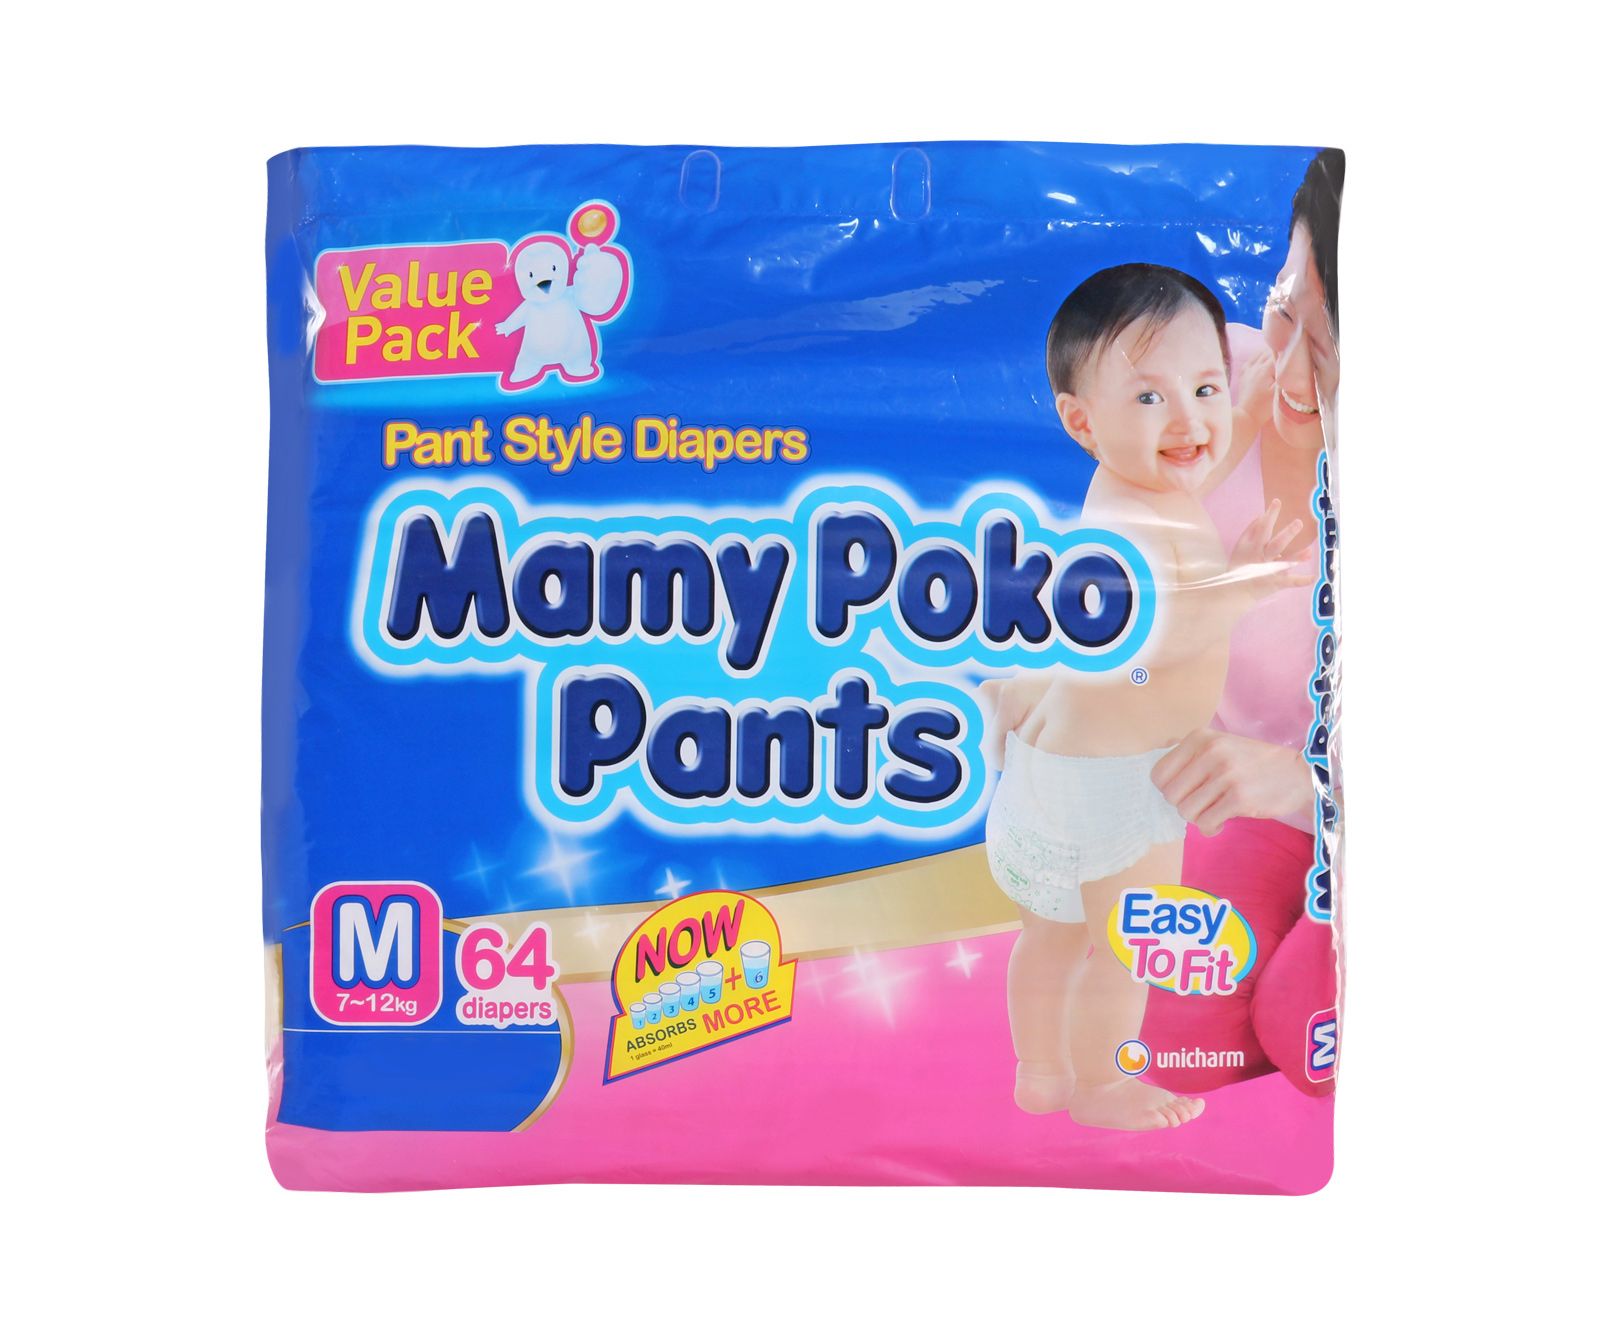 Mamy Poko Pants Pant Style Diapers